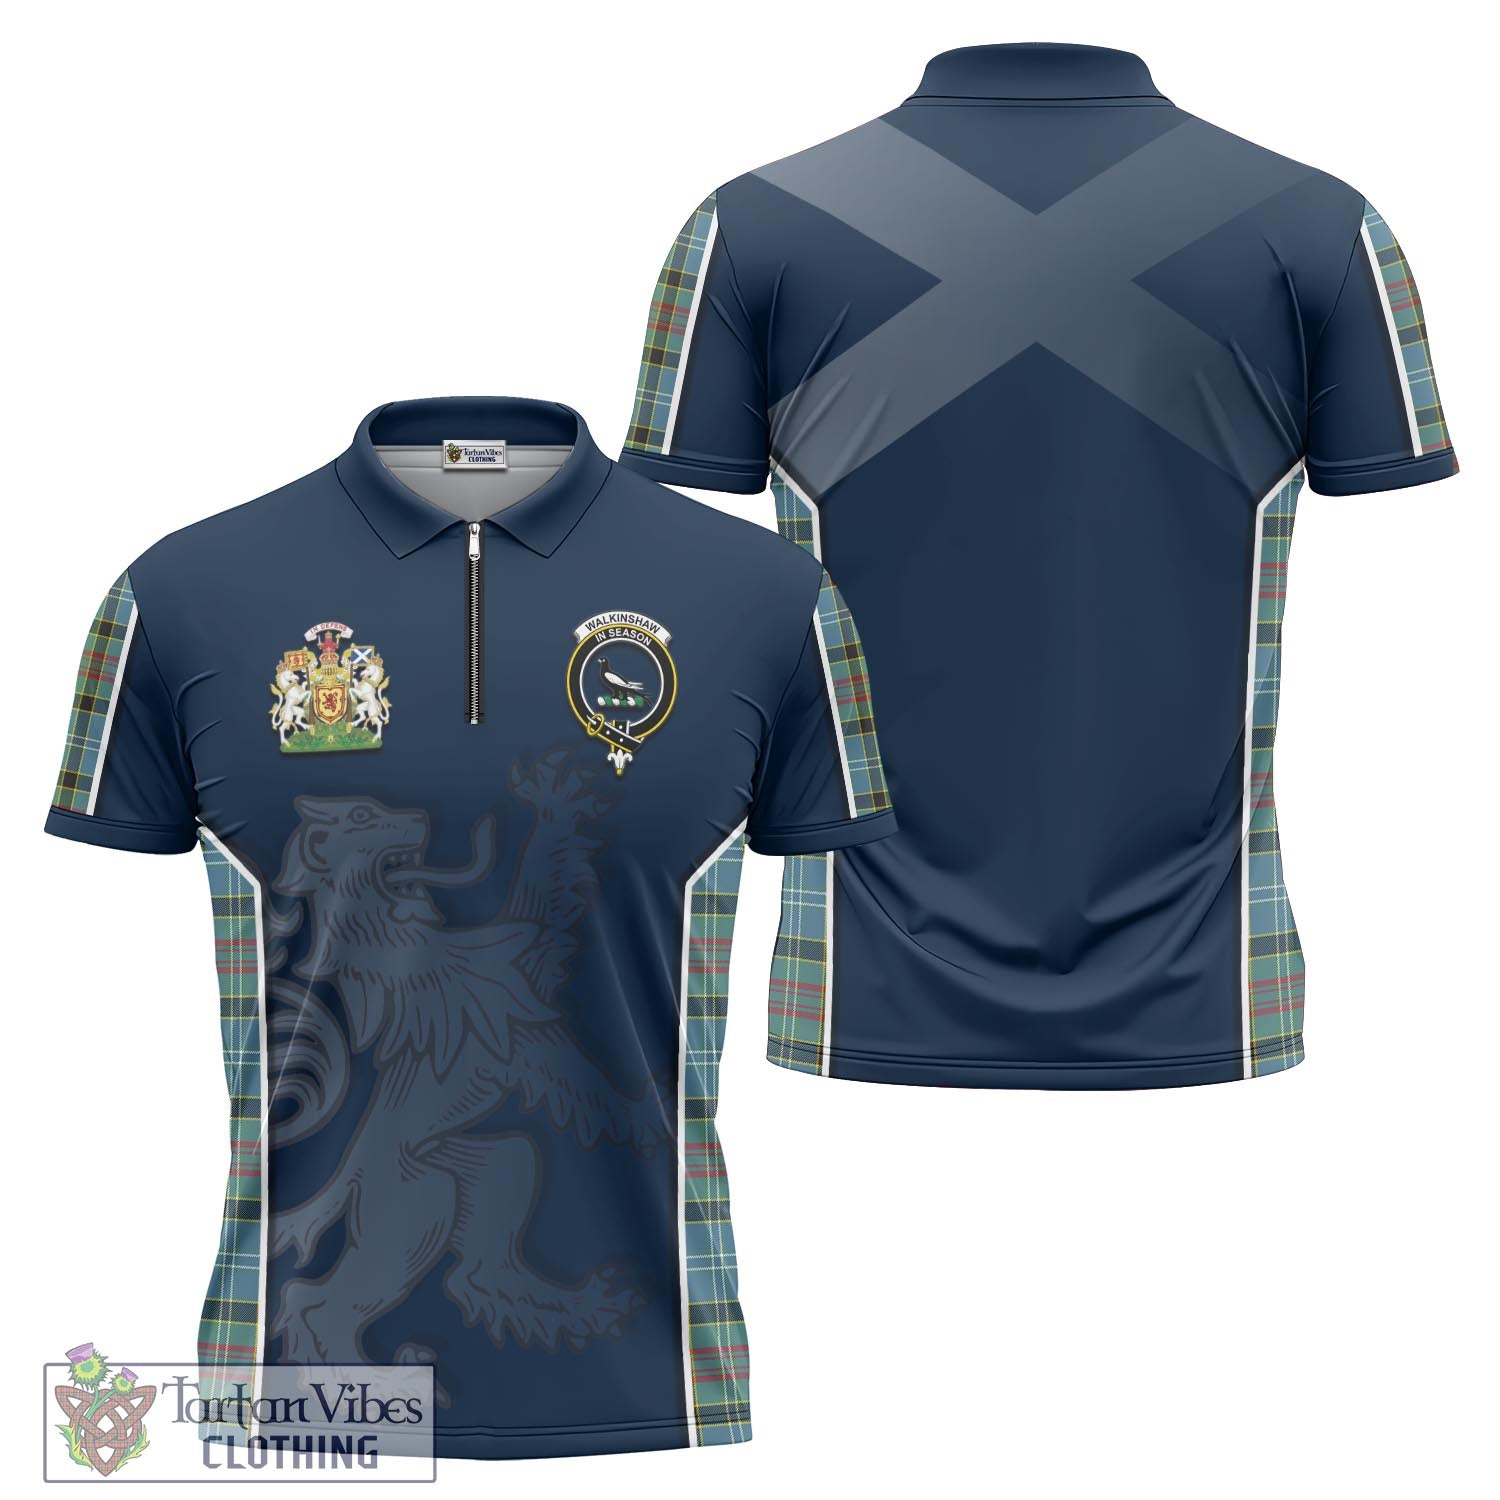 Tartan Vibes Clothing Walkinshaw Tartan Zipper Polo Shirt with Family Crest and Lion Rampant Vibes Sport Style